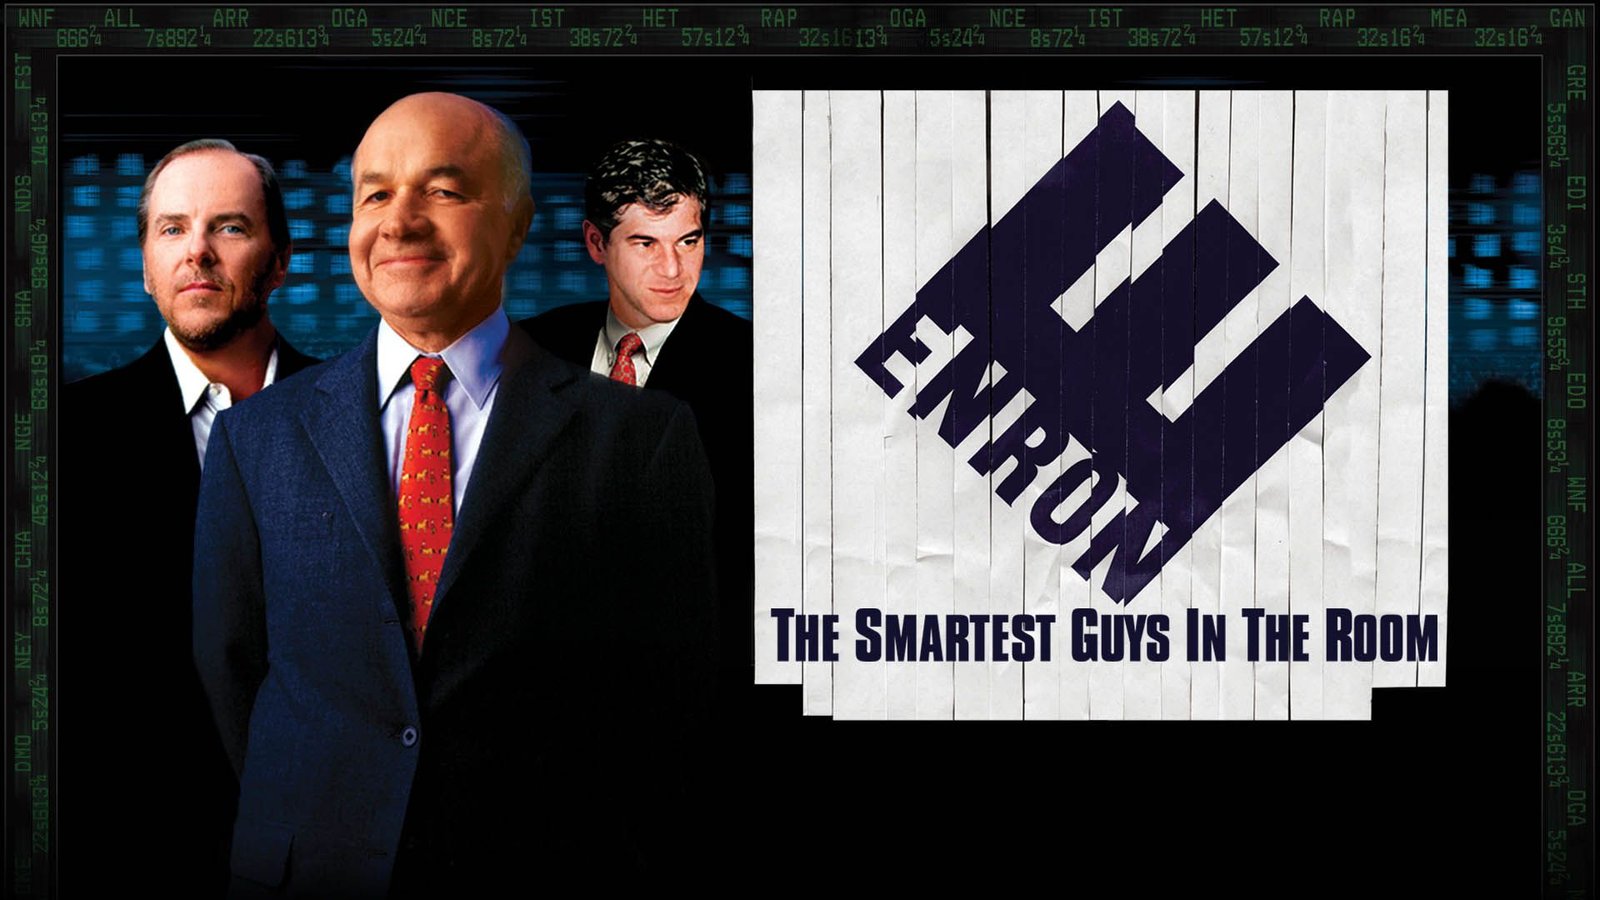 Enron: The Smartest Guys In the Room